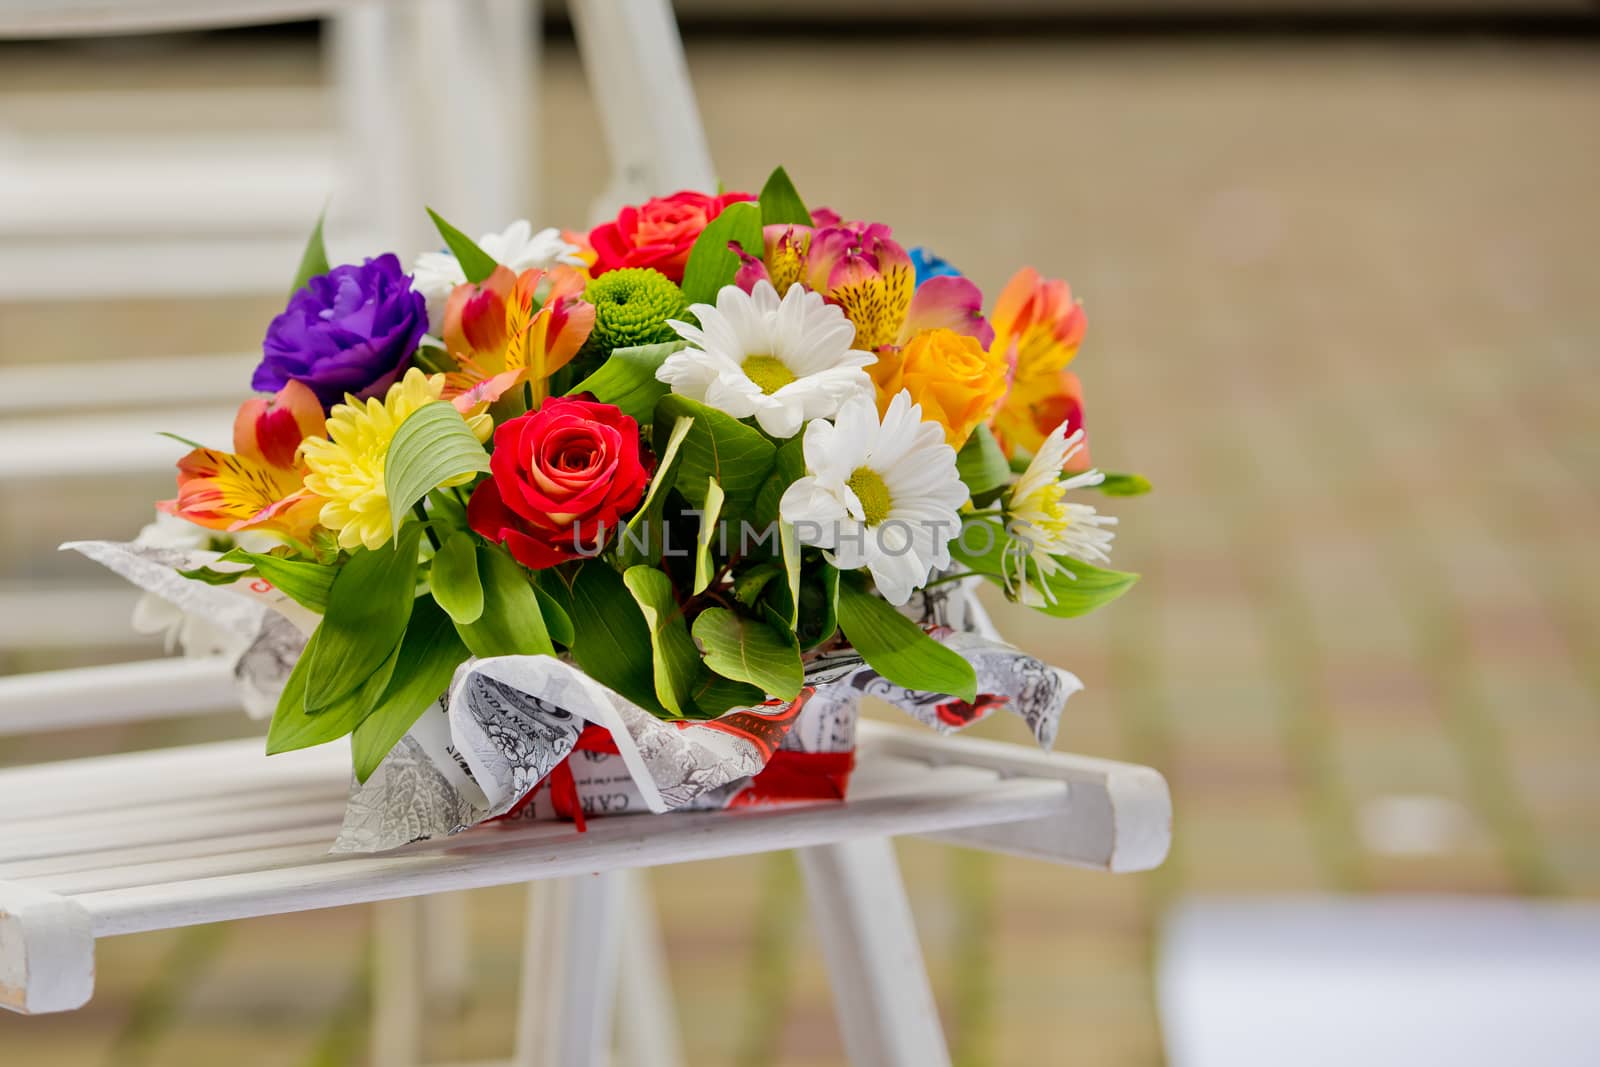 A beautiful gift bouquet in a wooden vase on a wooden bench. Wedding decorations.